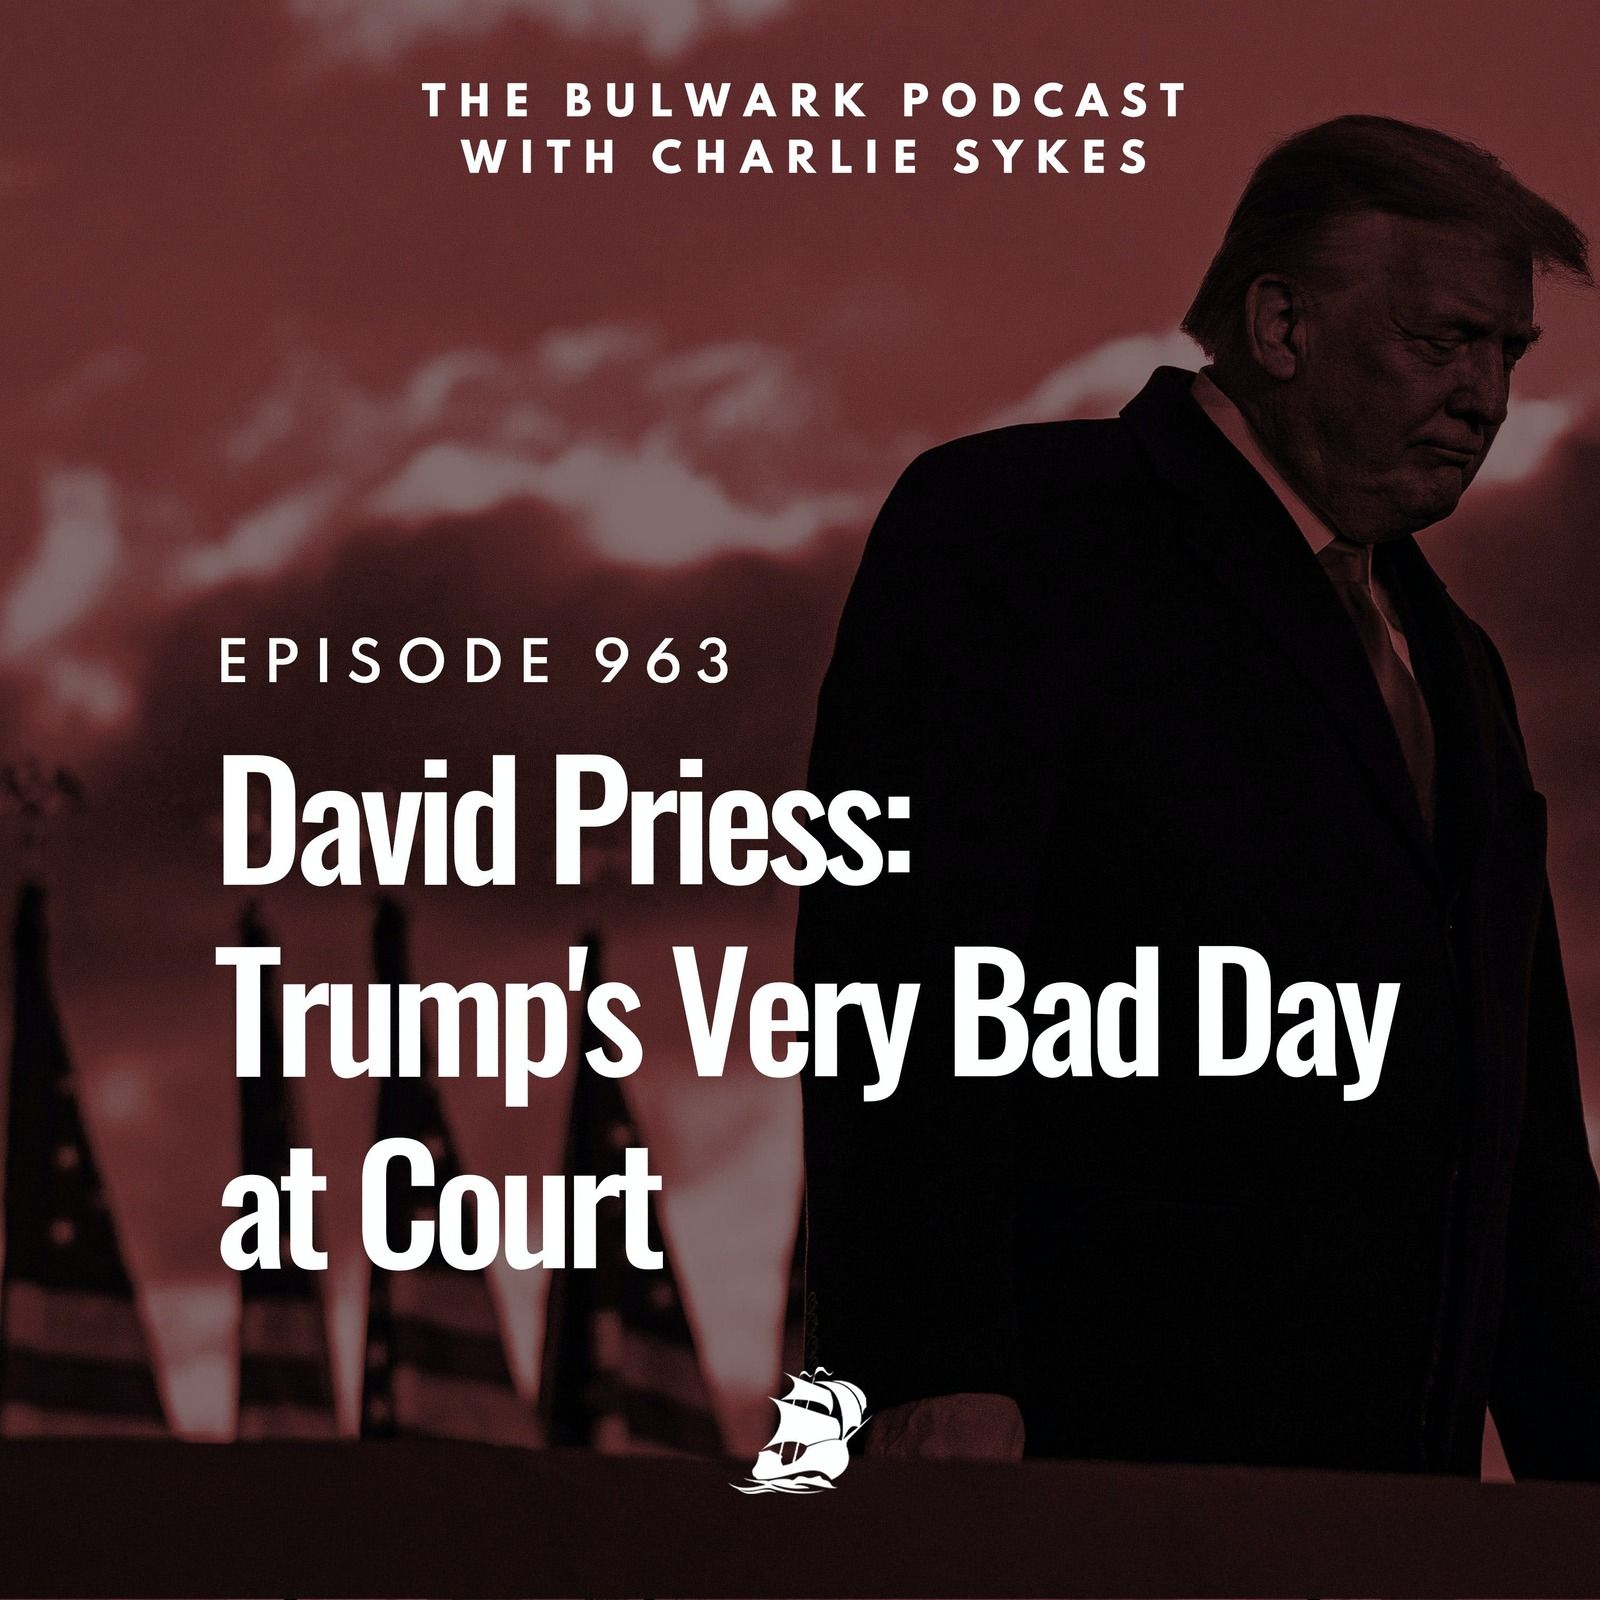 David Priess: Trump's Very Bad Day at Court by The Bulwark Podcast